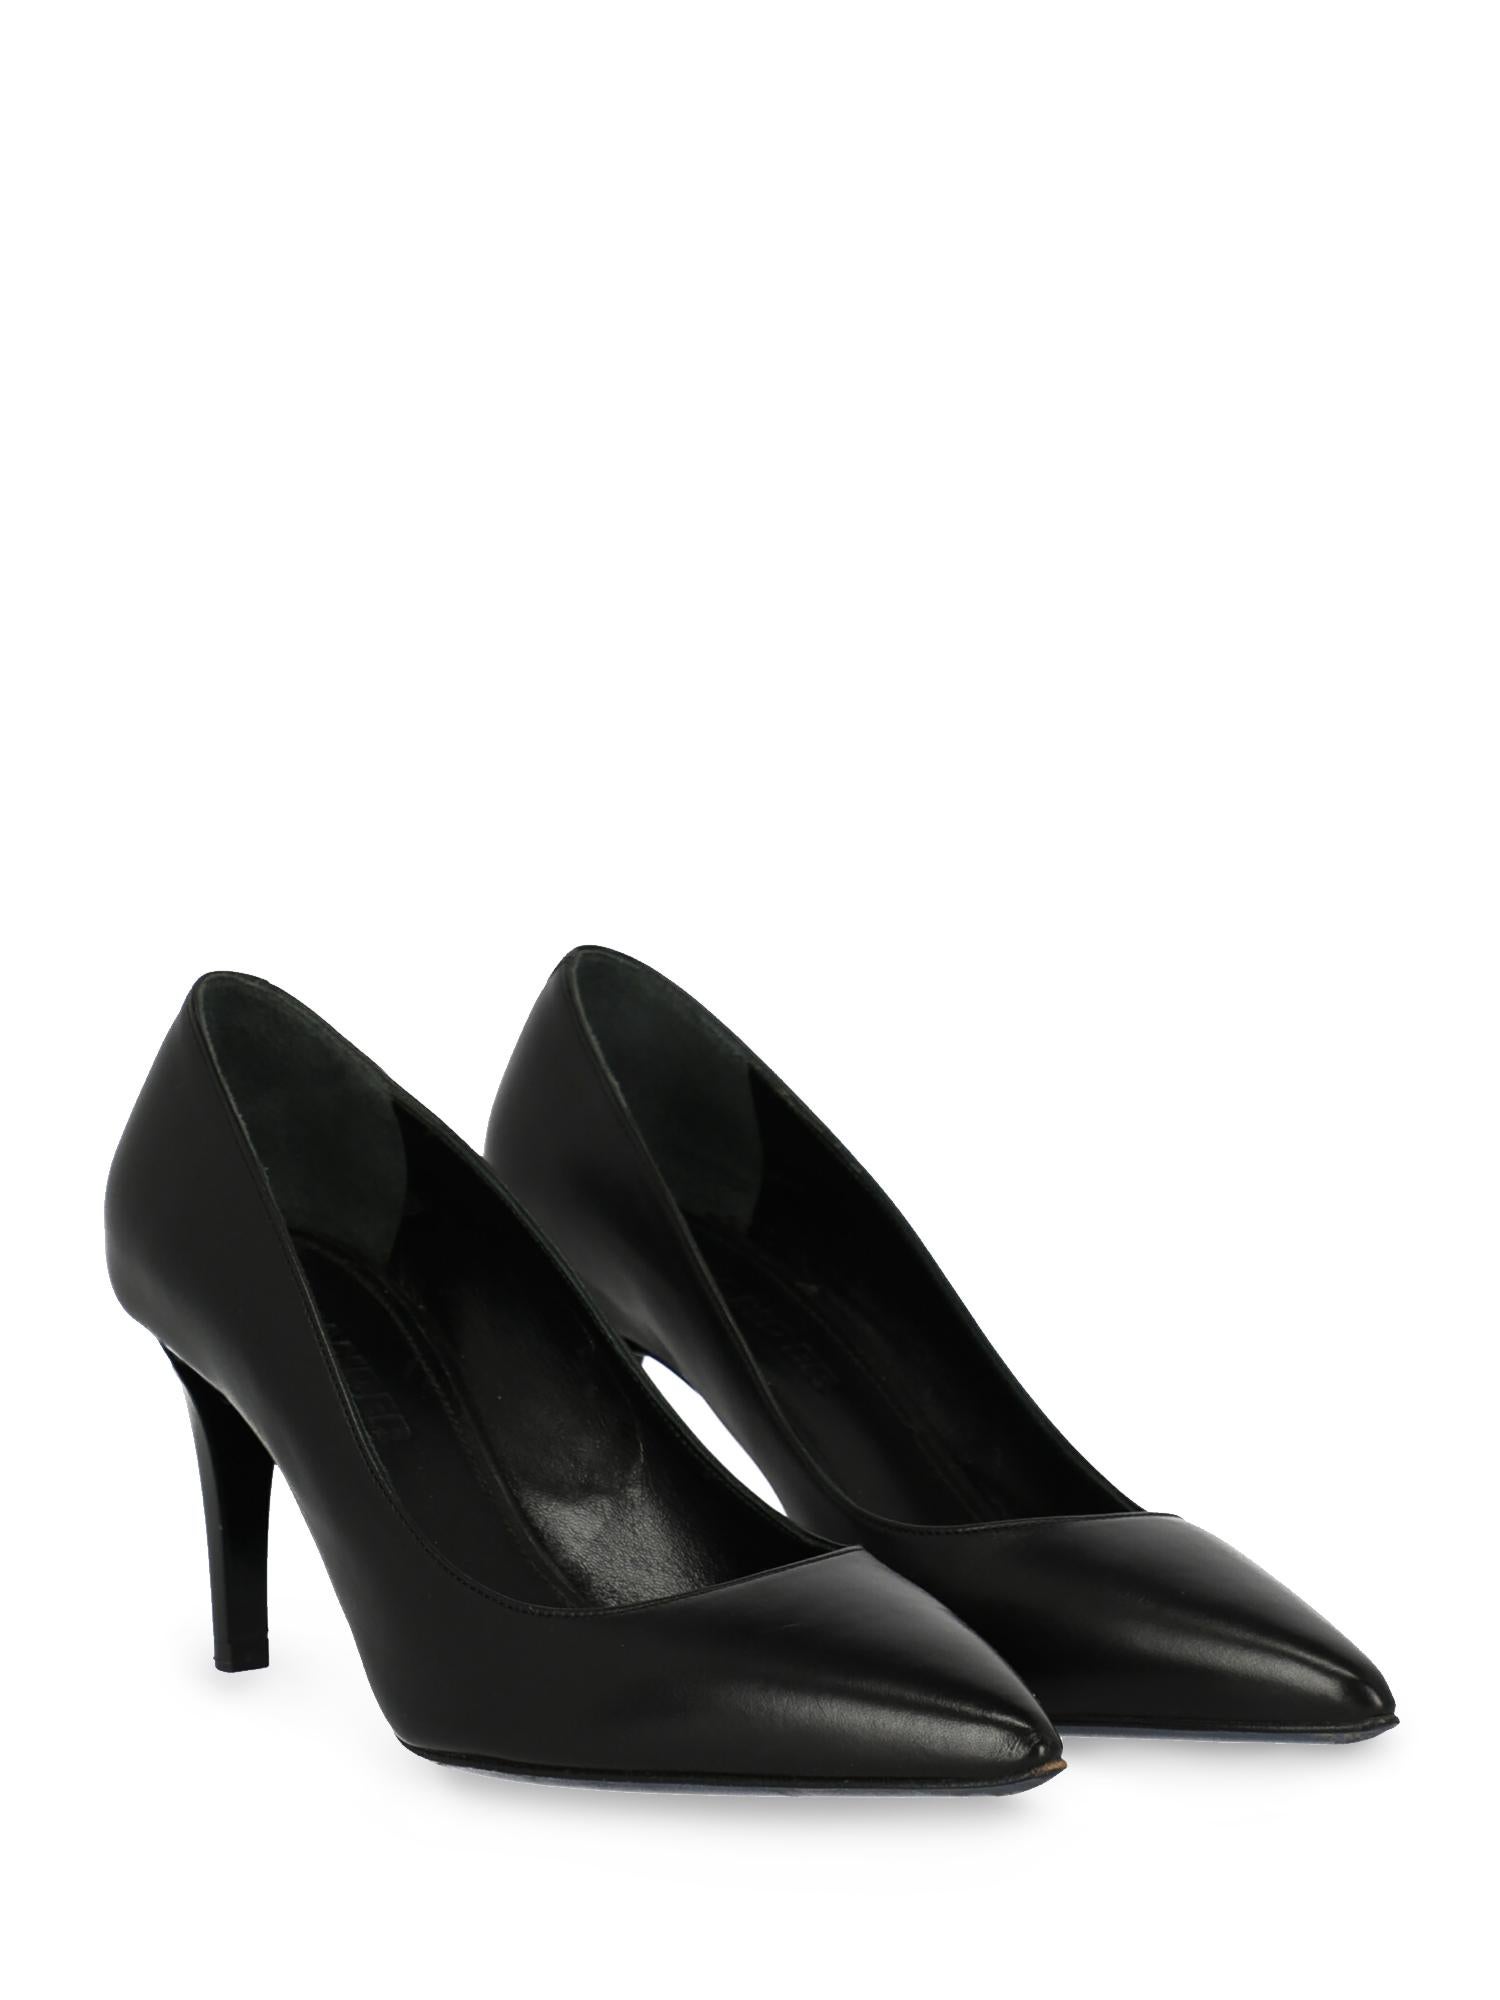 Pumps, leather, solid color, pointed toe, branded insole, tapered heel, mid heel, leather lining. Product Condition: Very Good. Sole: slightly visible marks. Upper: negligible scuffing
